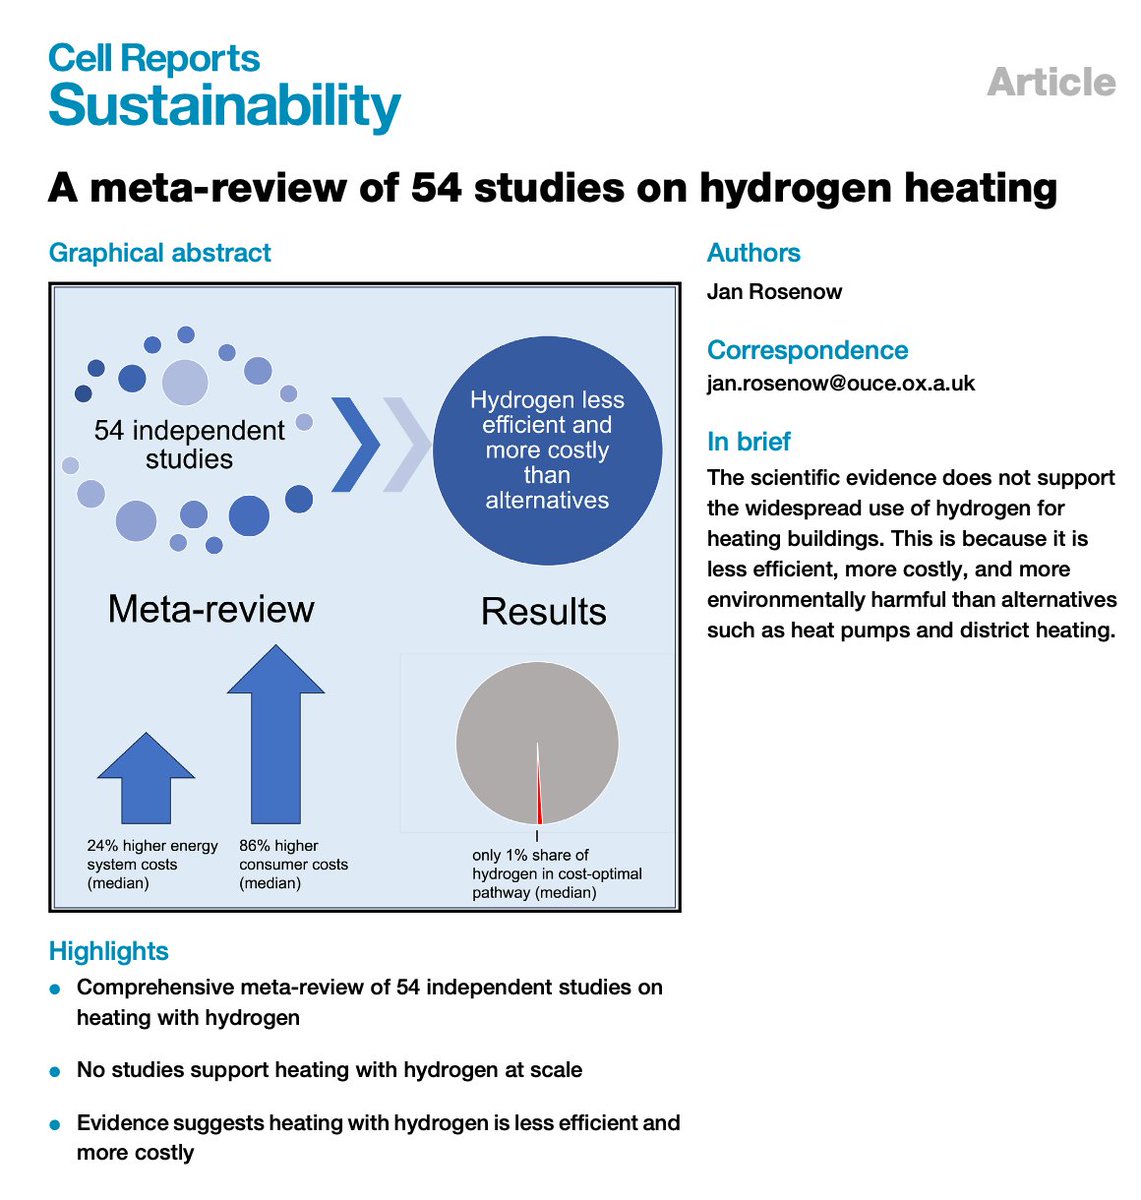 NEW RESEARCH: My new meta-review of 54 independent studies suggests no major role of hydrogen for heating. Why? ✅ hydrogen is expensive ✅ hydrogen is inefficient ✅ there are better alternatives Full paper @cellpressnews: cell.com/cell-reports-s… 🧵